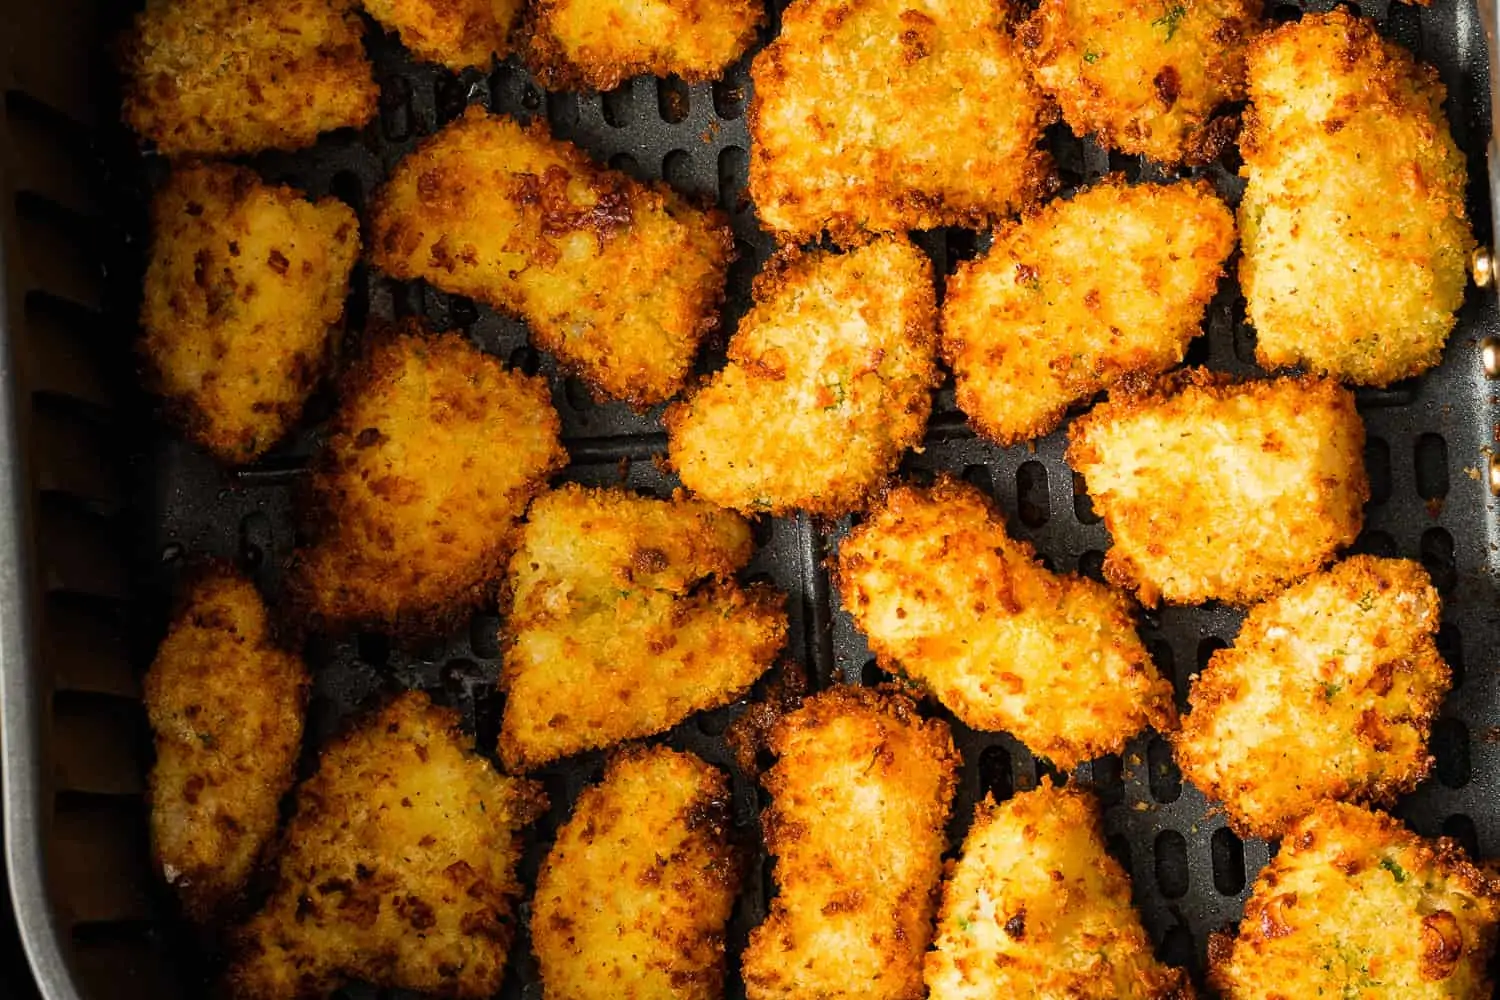 Crispy and delicious air fryer fish nuggets.